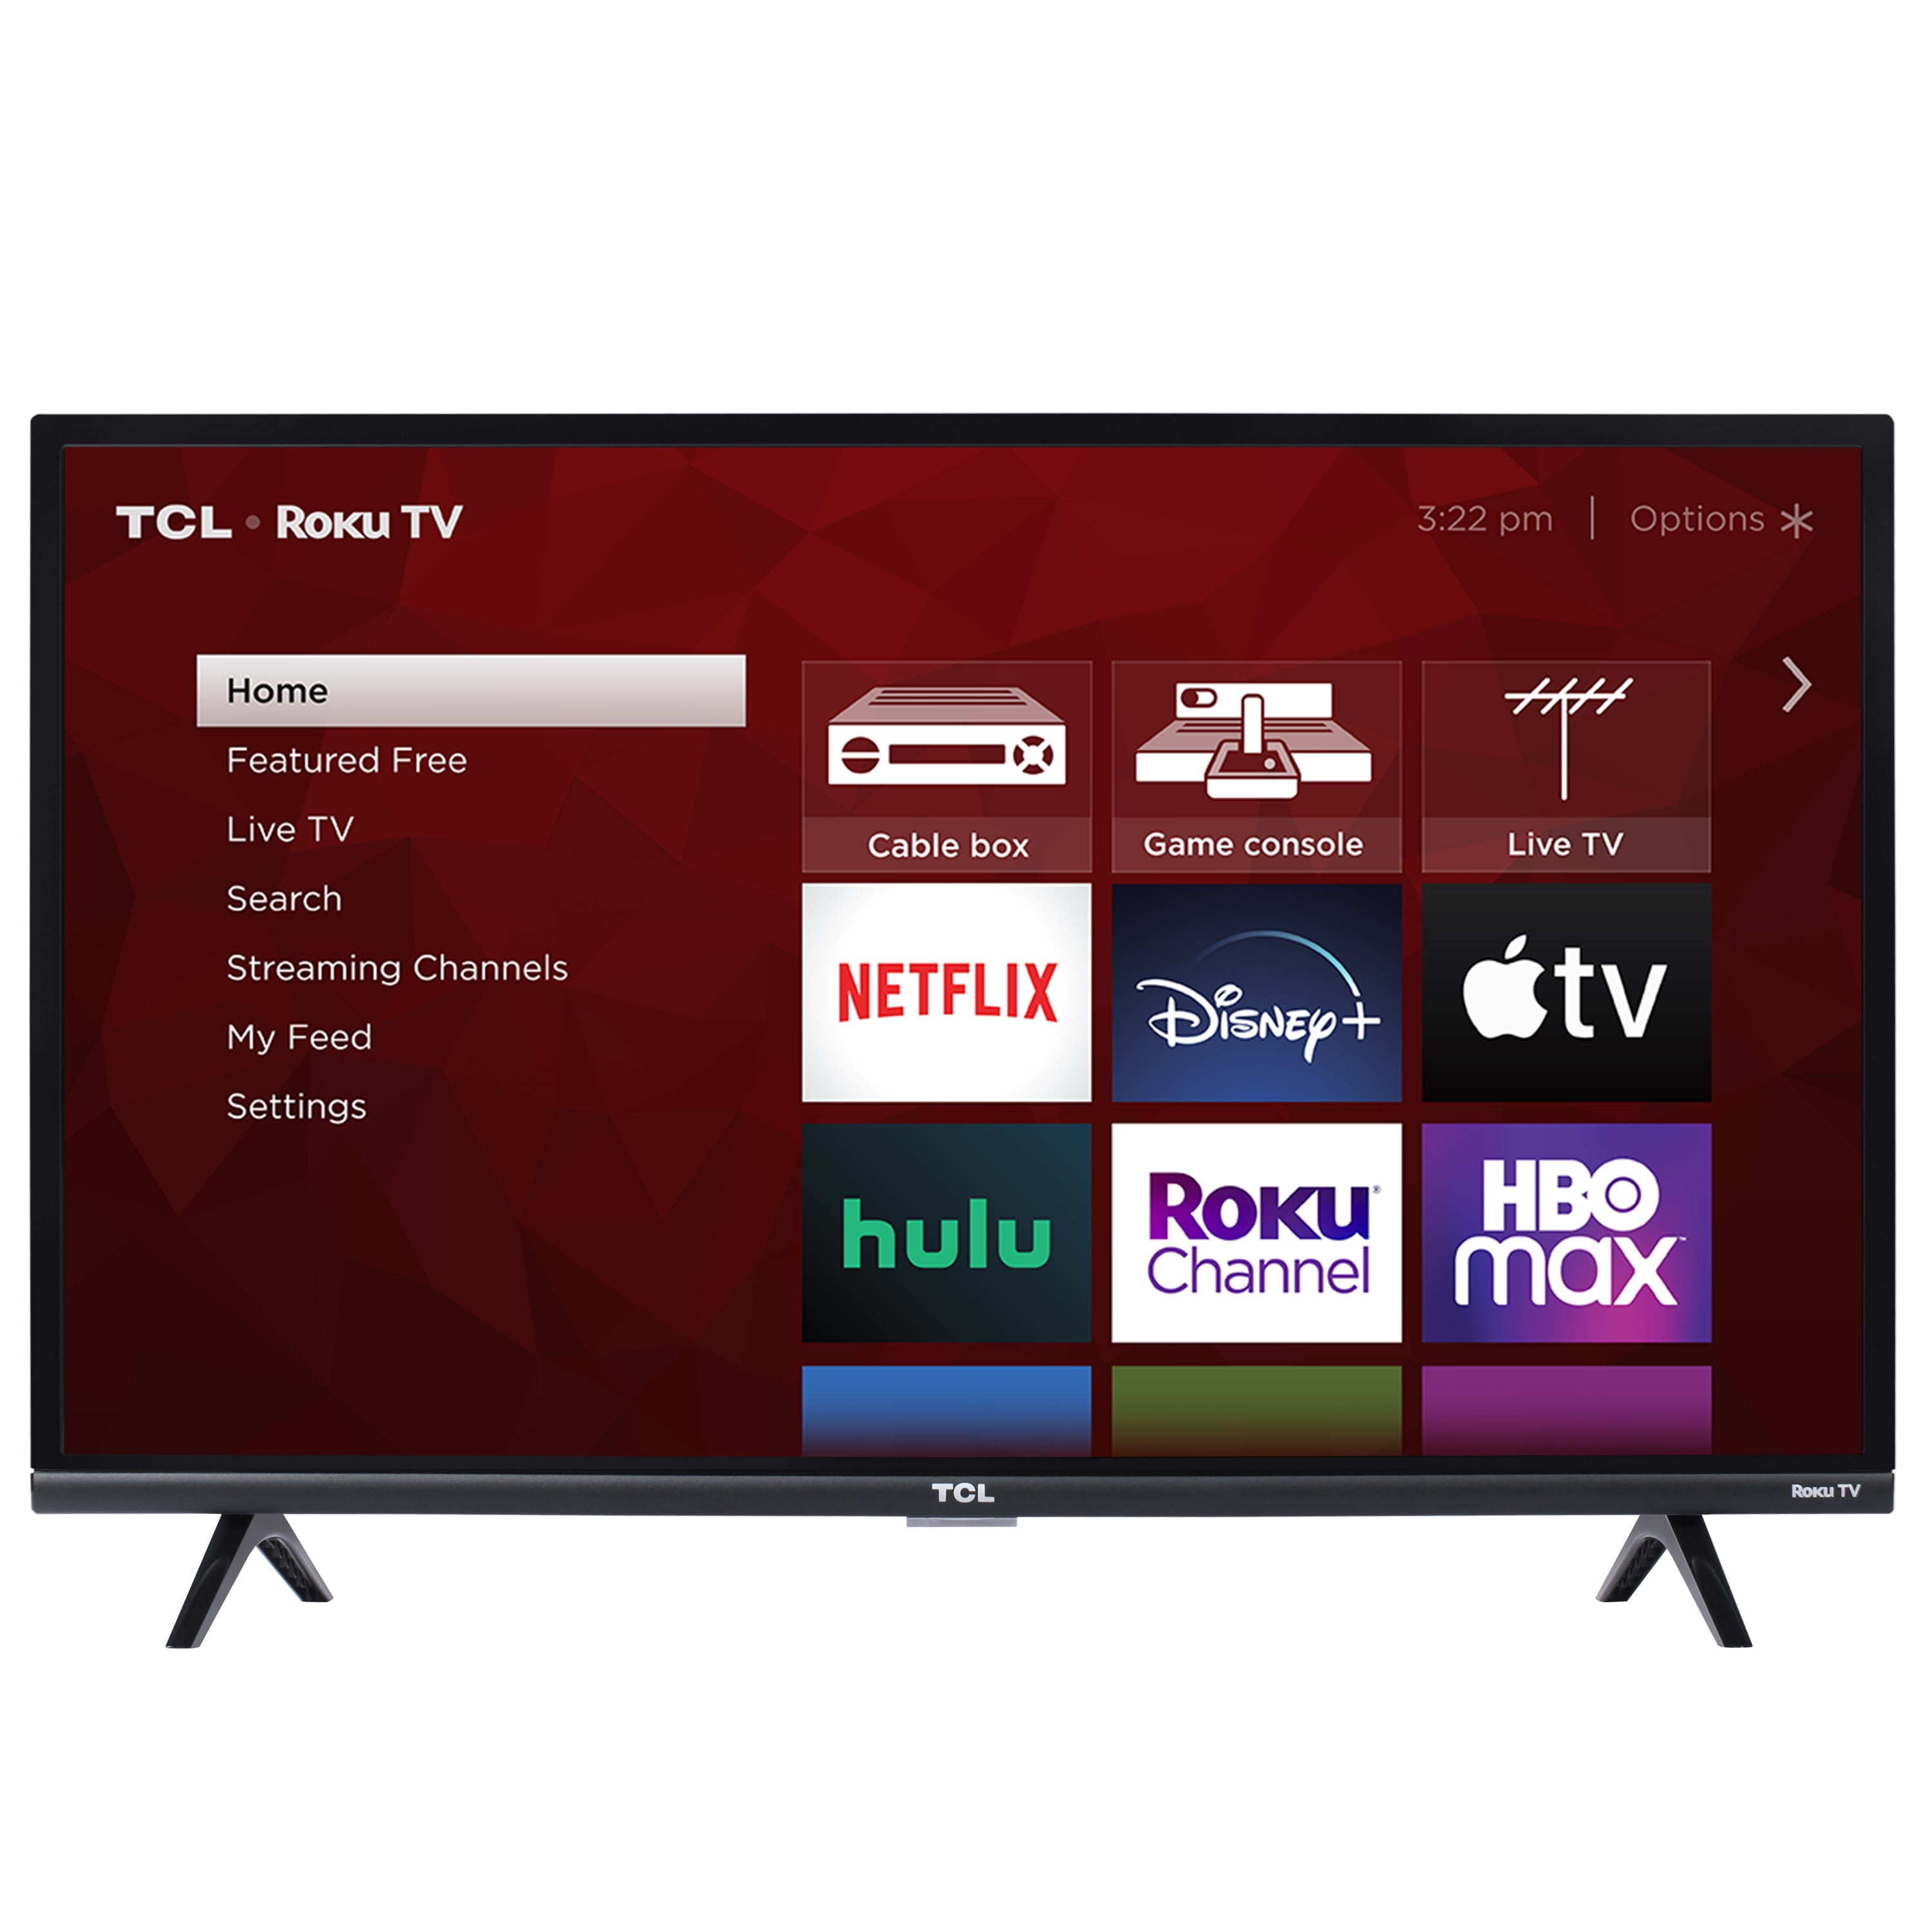 TCL 32 S Class 1080p FHD LED Smart TV with Fire TV - 32S350F